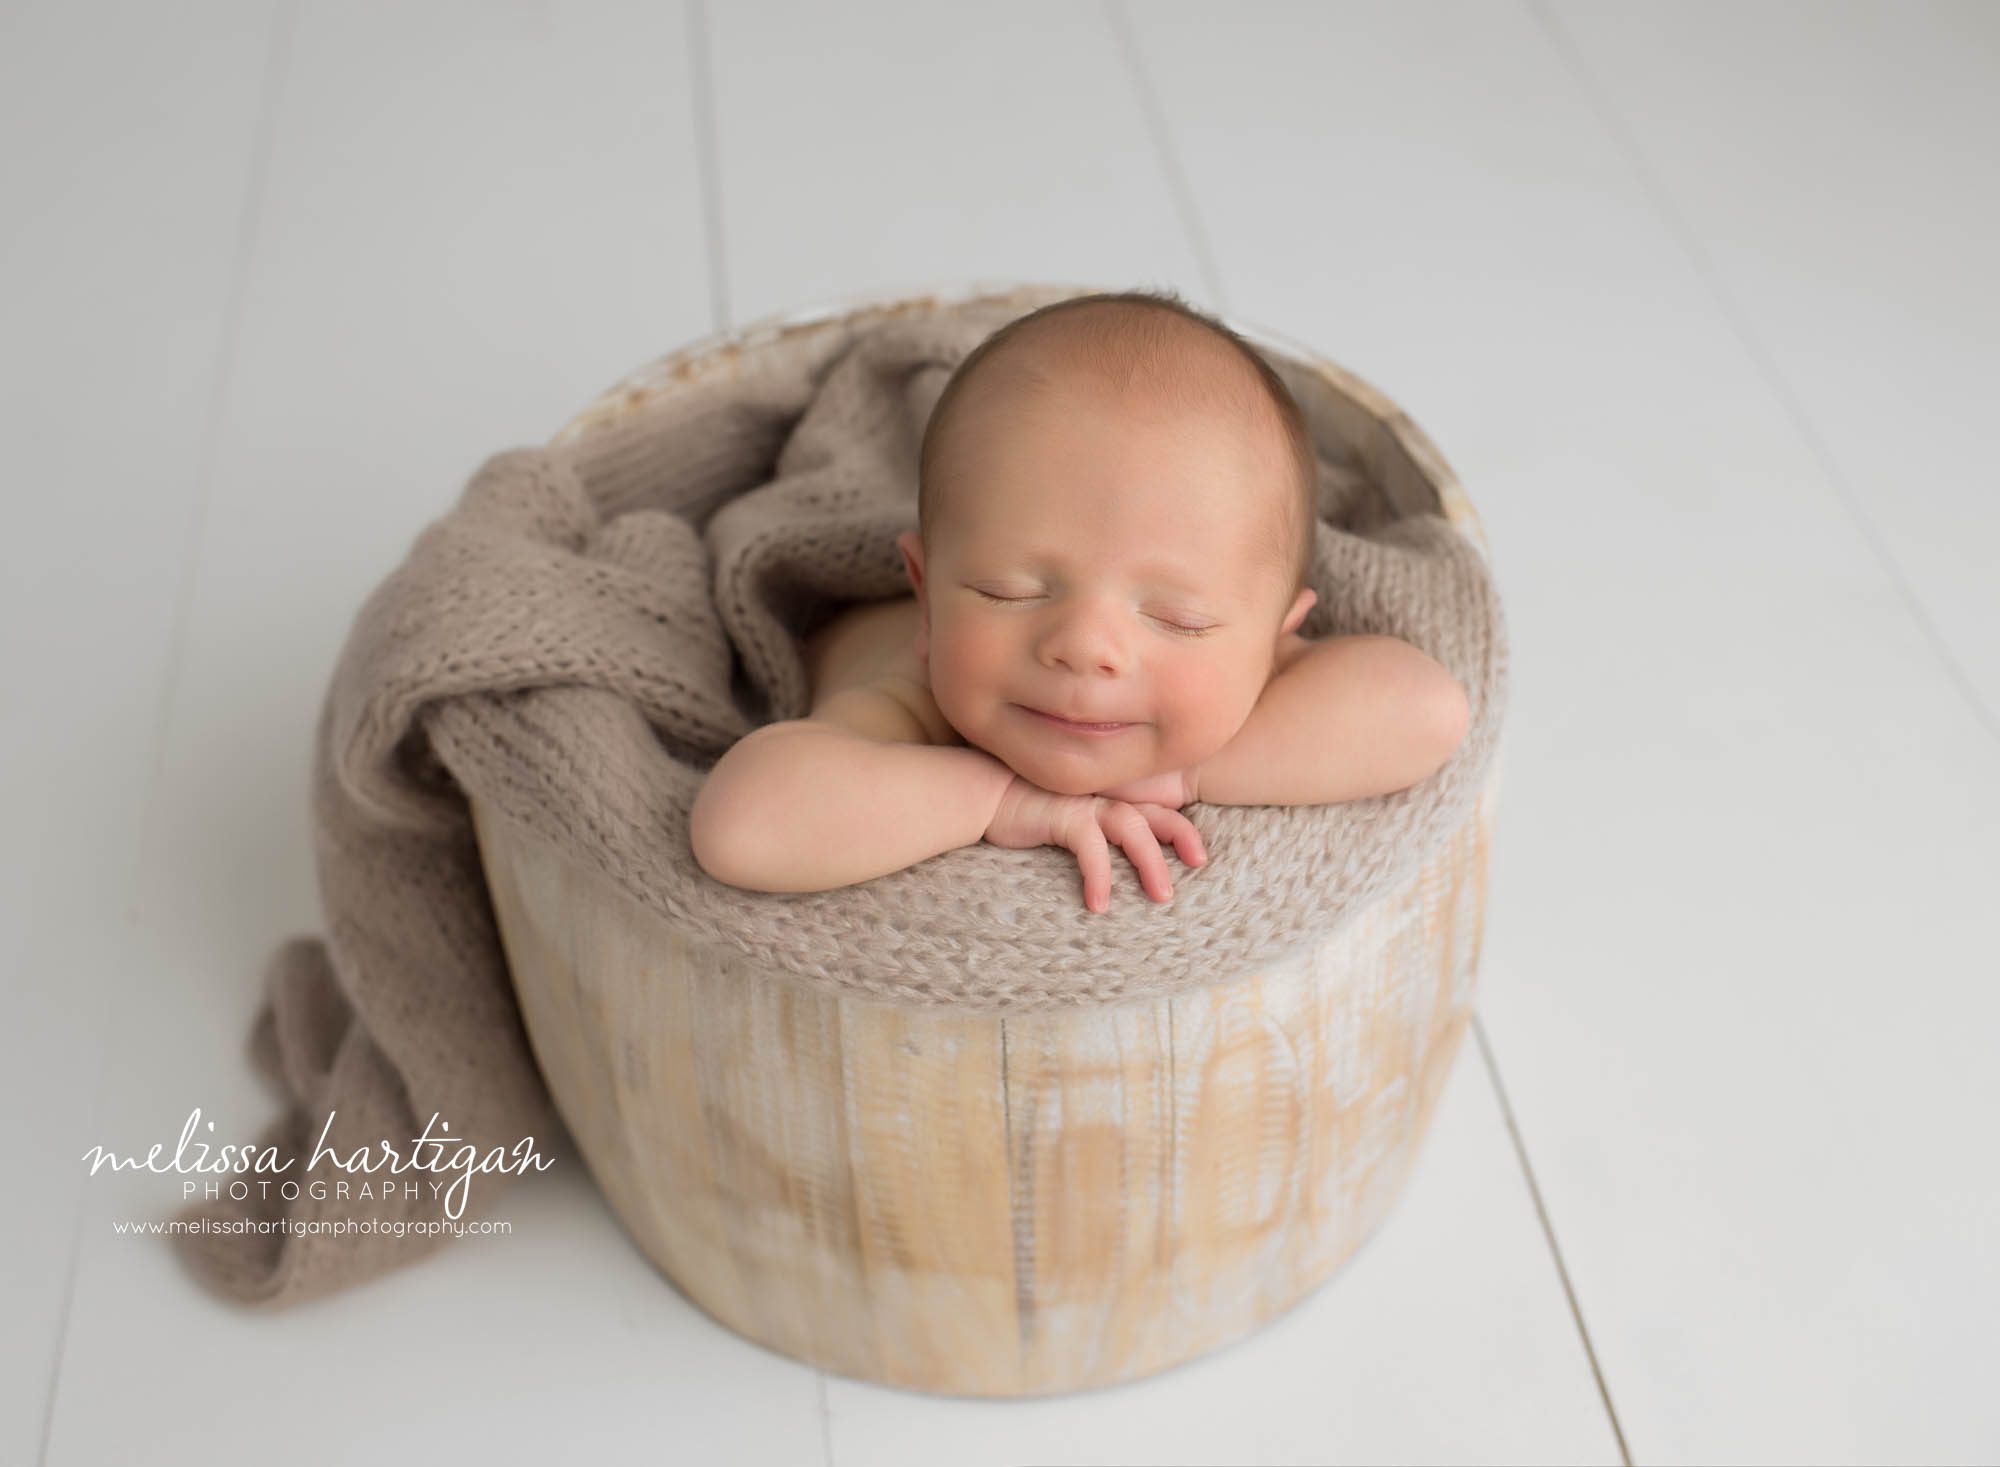 newborn baby boy posed in wooden barrel sleeping smiling smirk on his face